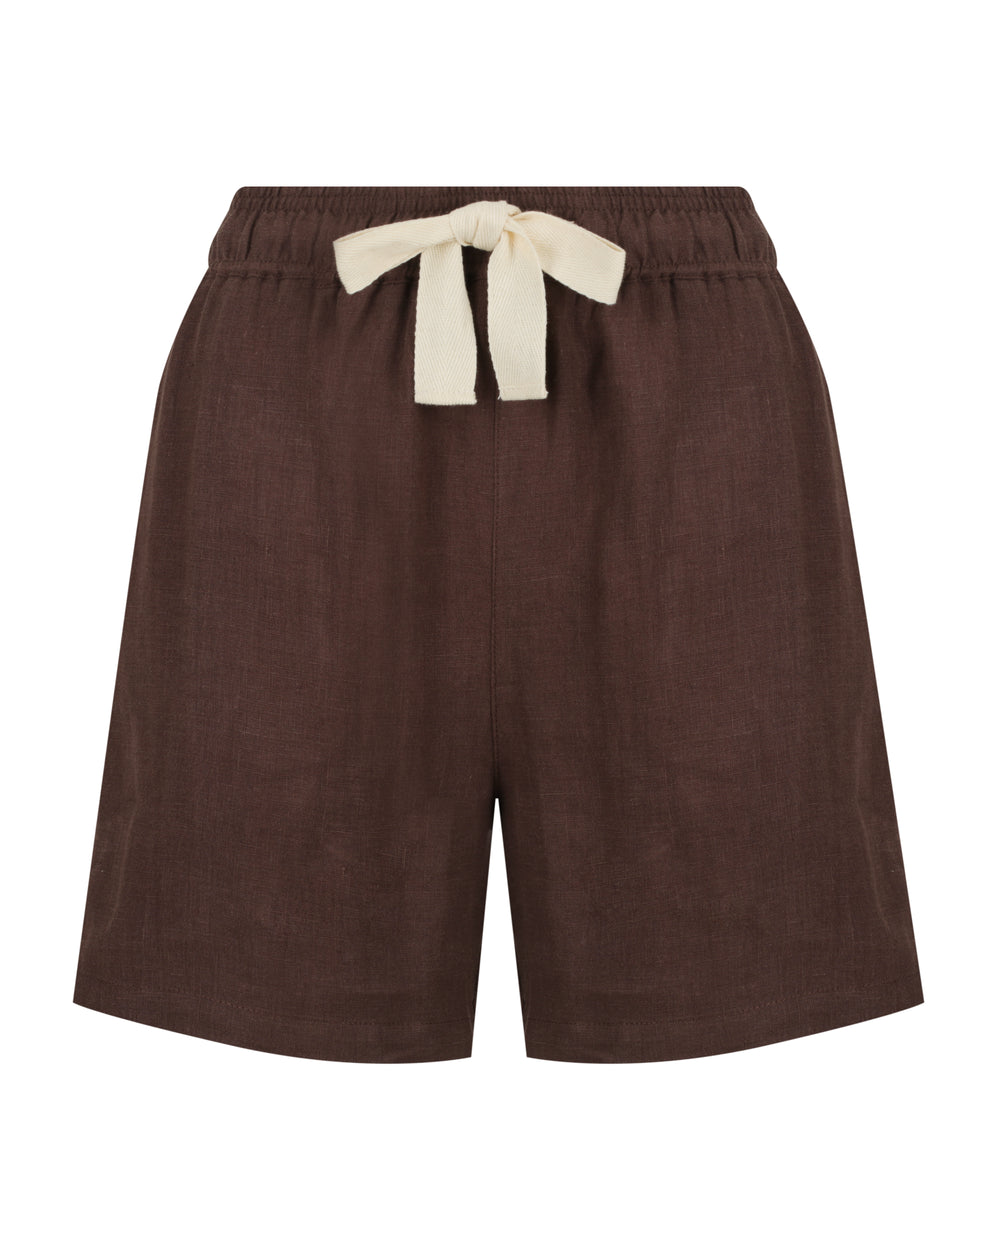 The Relaxed Short